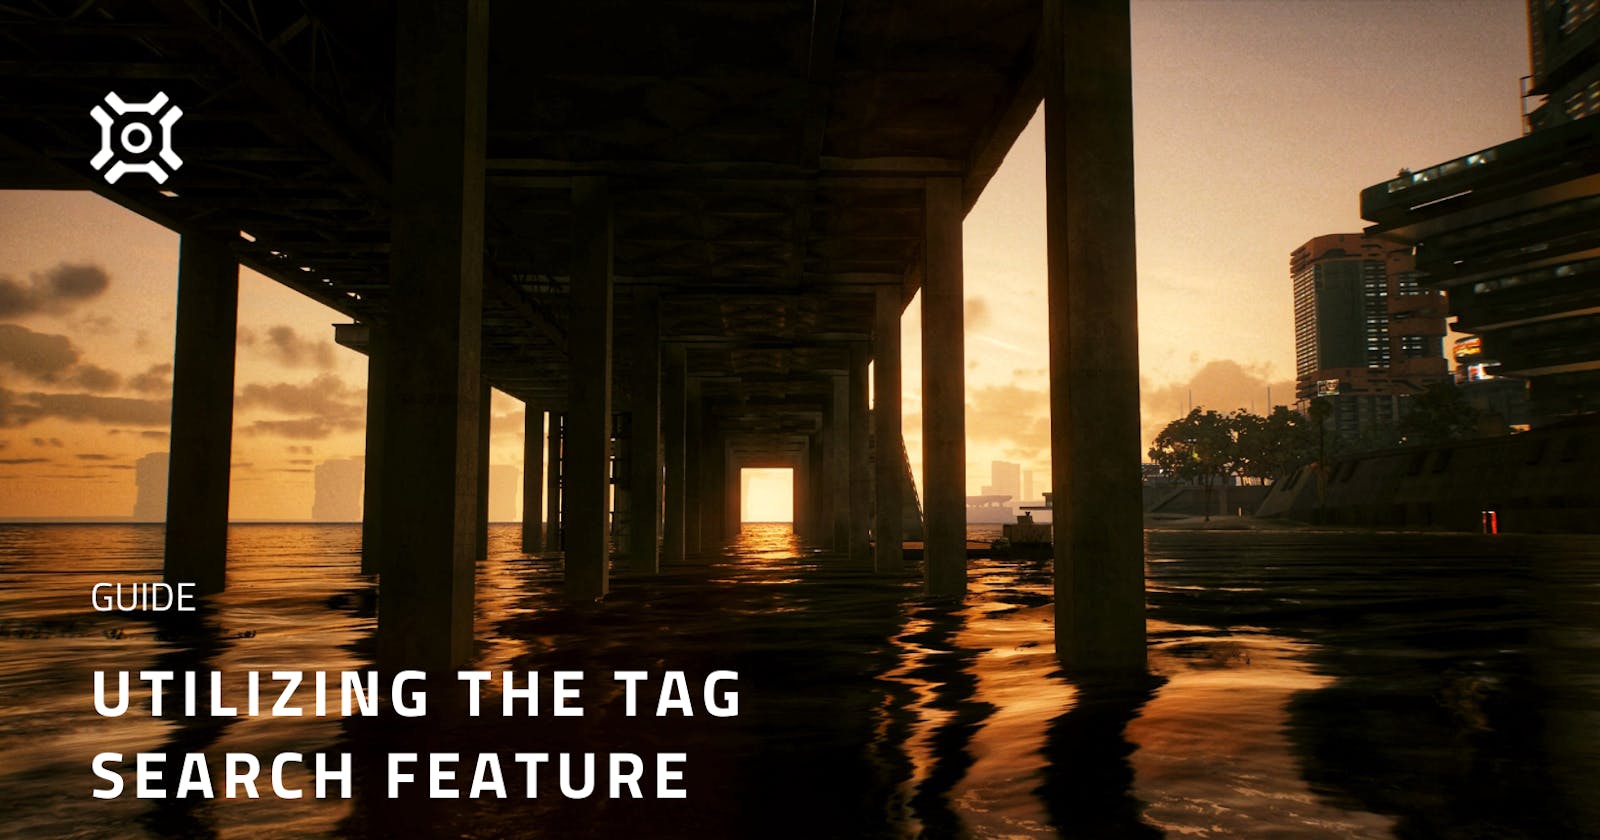 Stunning Sunset Photos on Picashot: Utilizing the Tag Search Feature